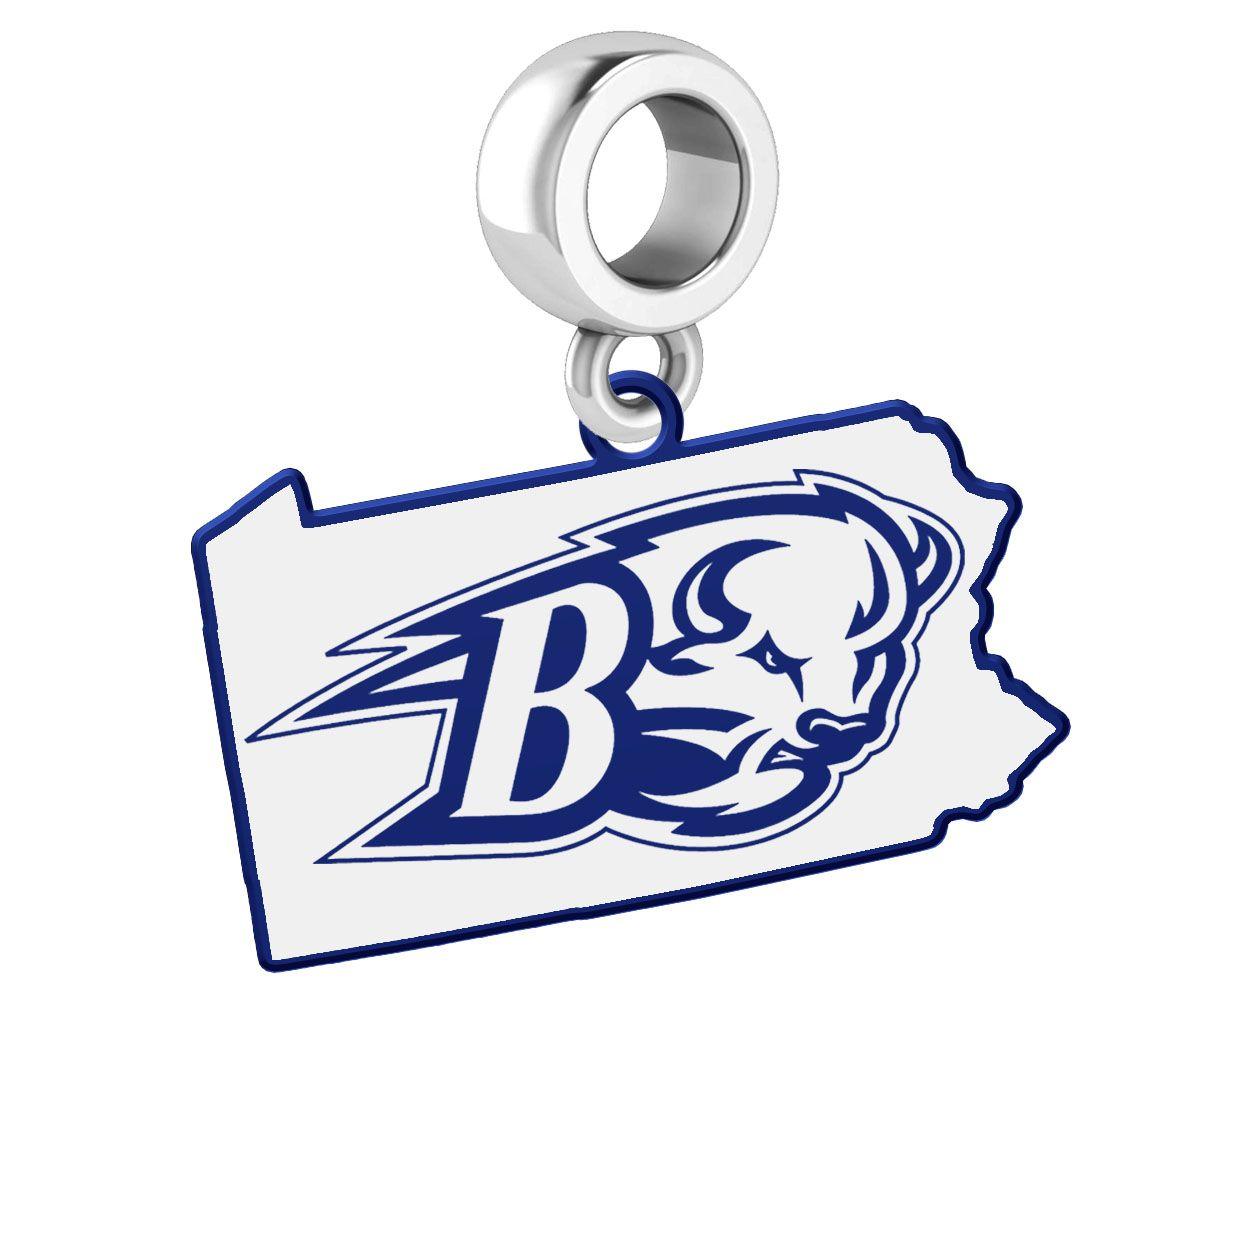 Bucknell Bison Logo - Bucknell Bison Dangle Charm With the State Cutout and School Logo